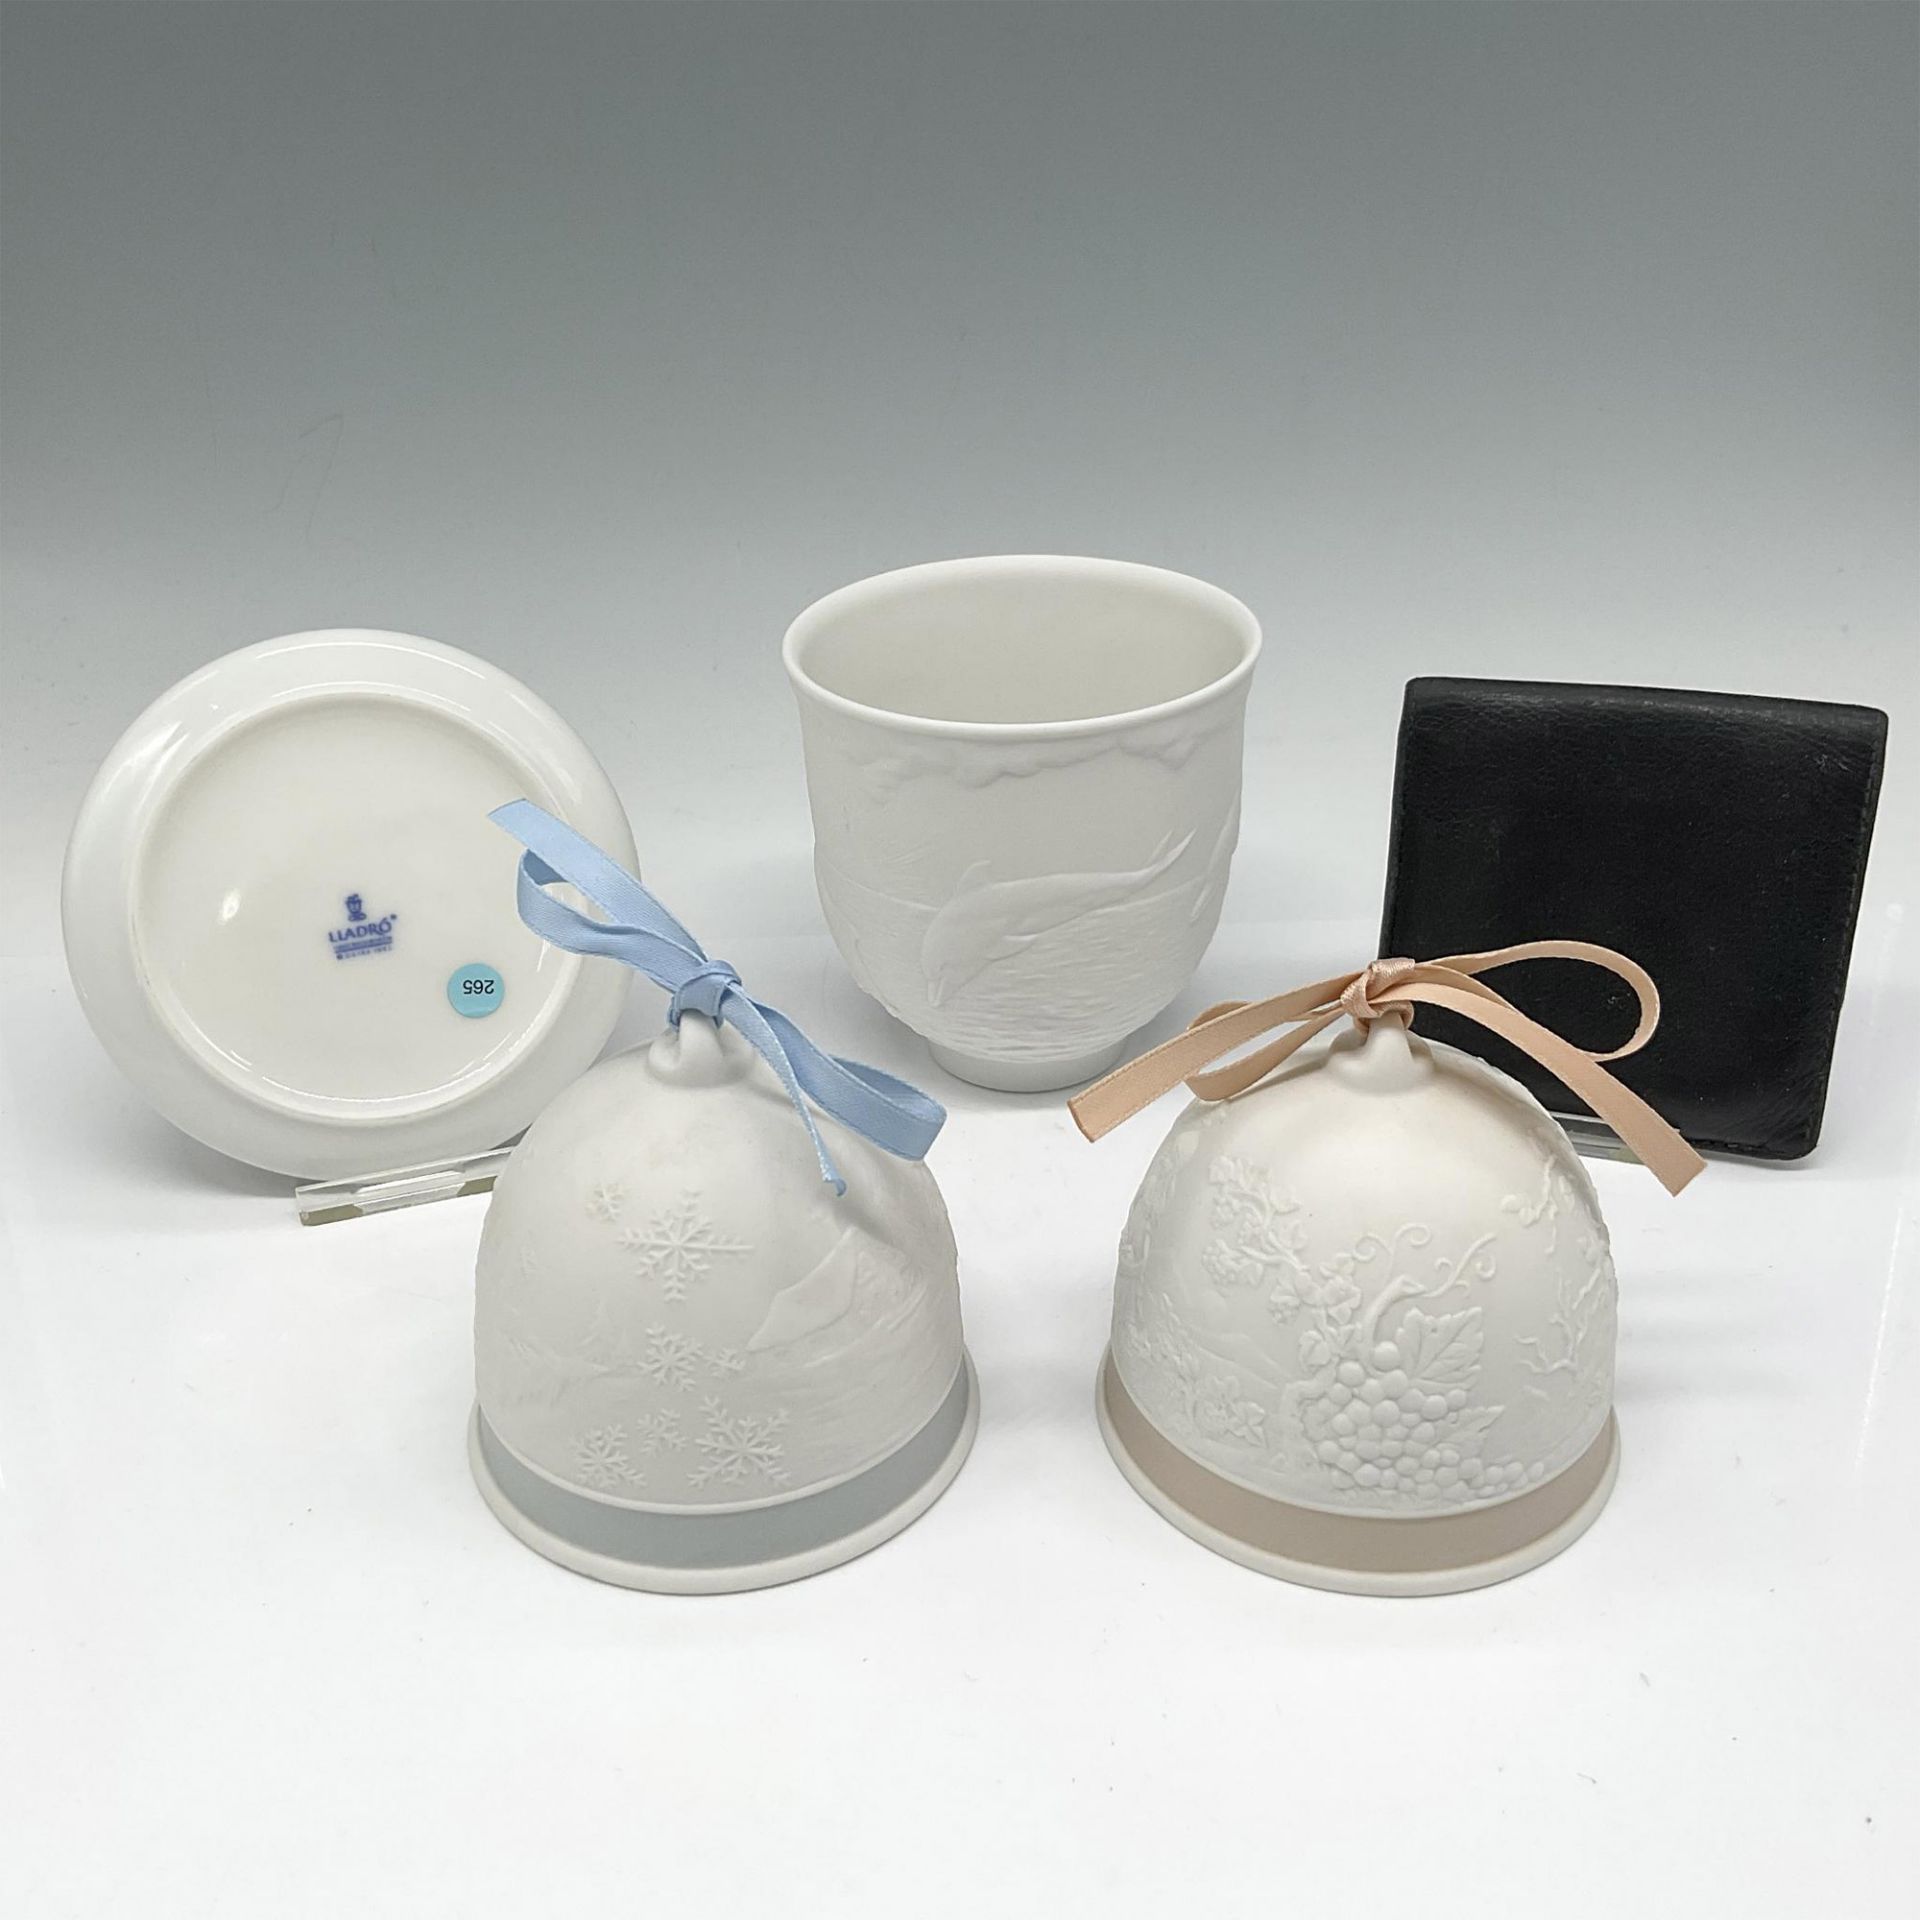 5pc Lladro CS Bells, Dolphins Cup, Duck Plate & Coin Purse - Image 2 of 4